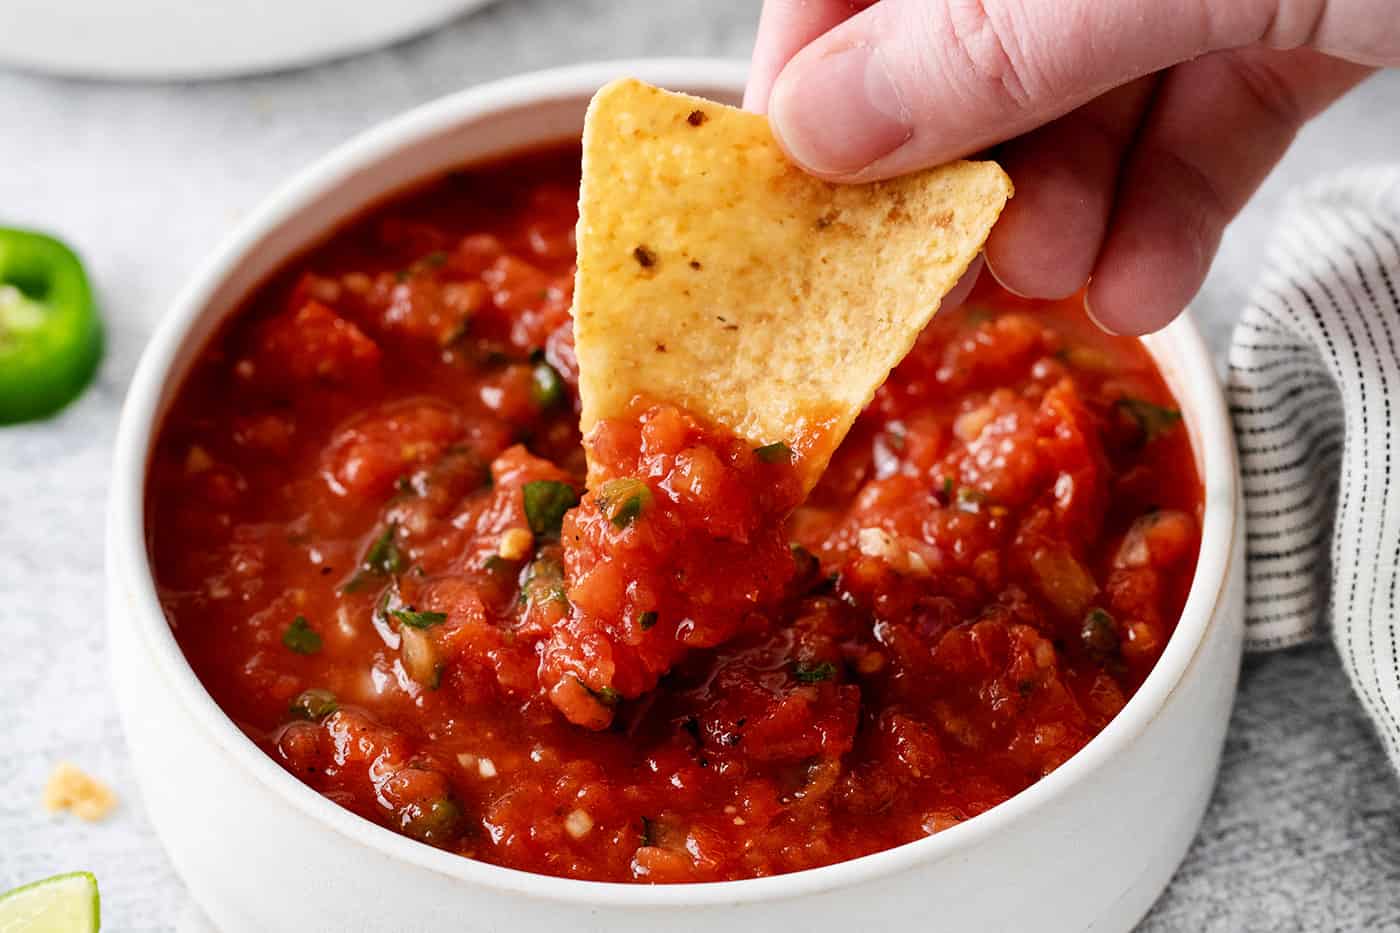 A hand dipping a tortilla chip into restaurant style salsa